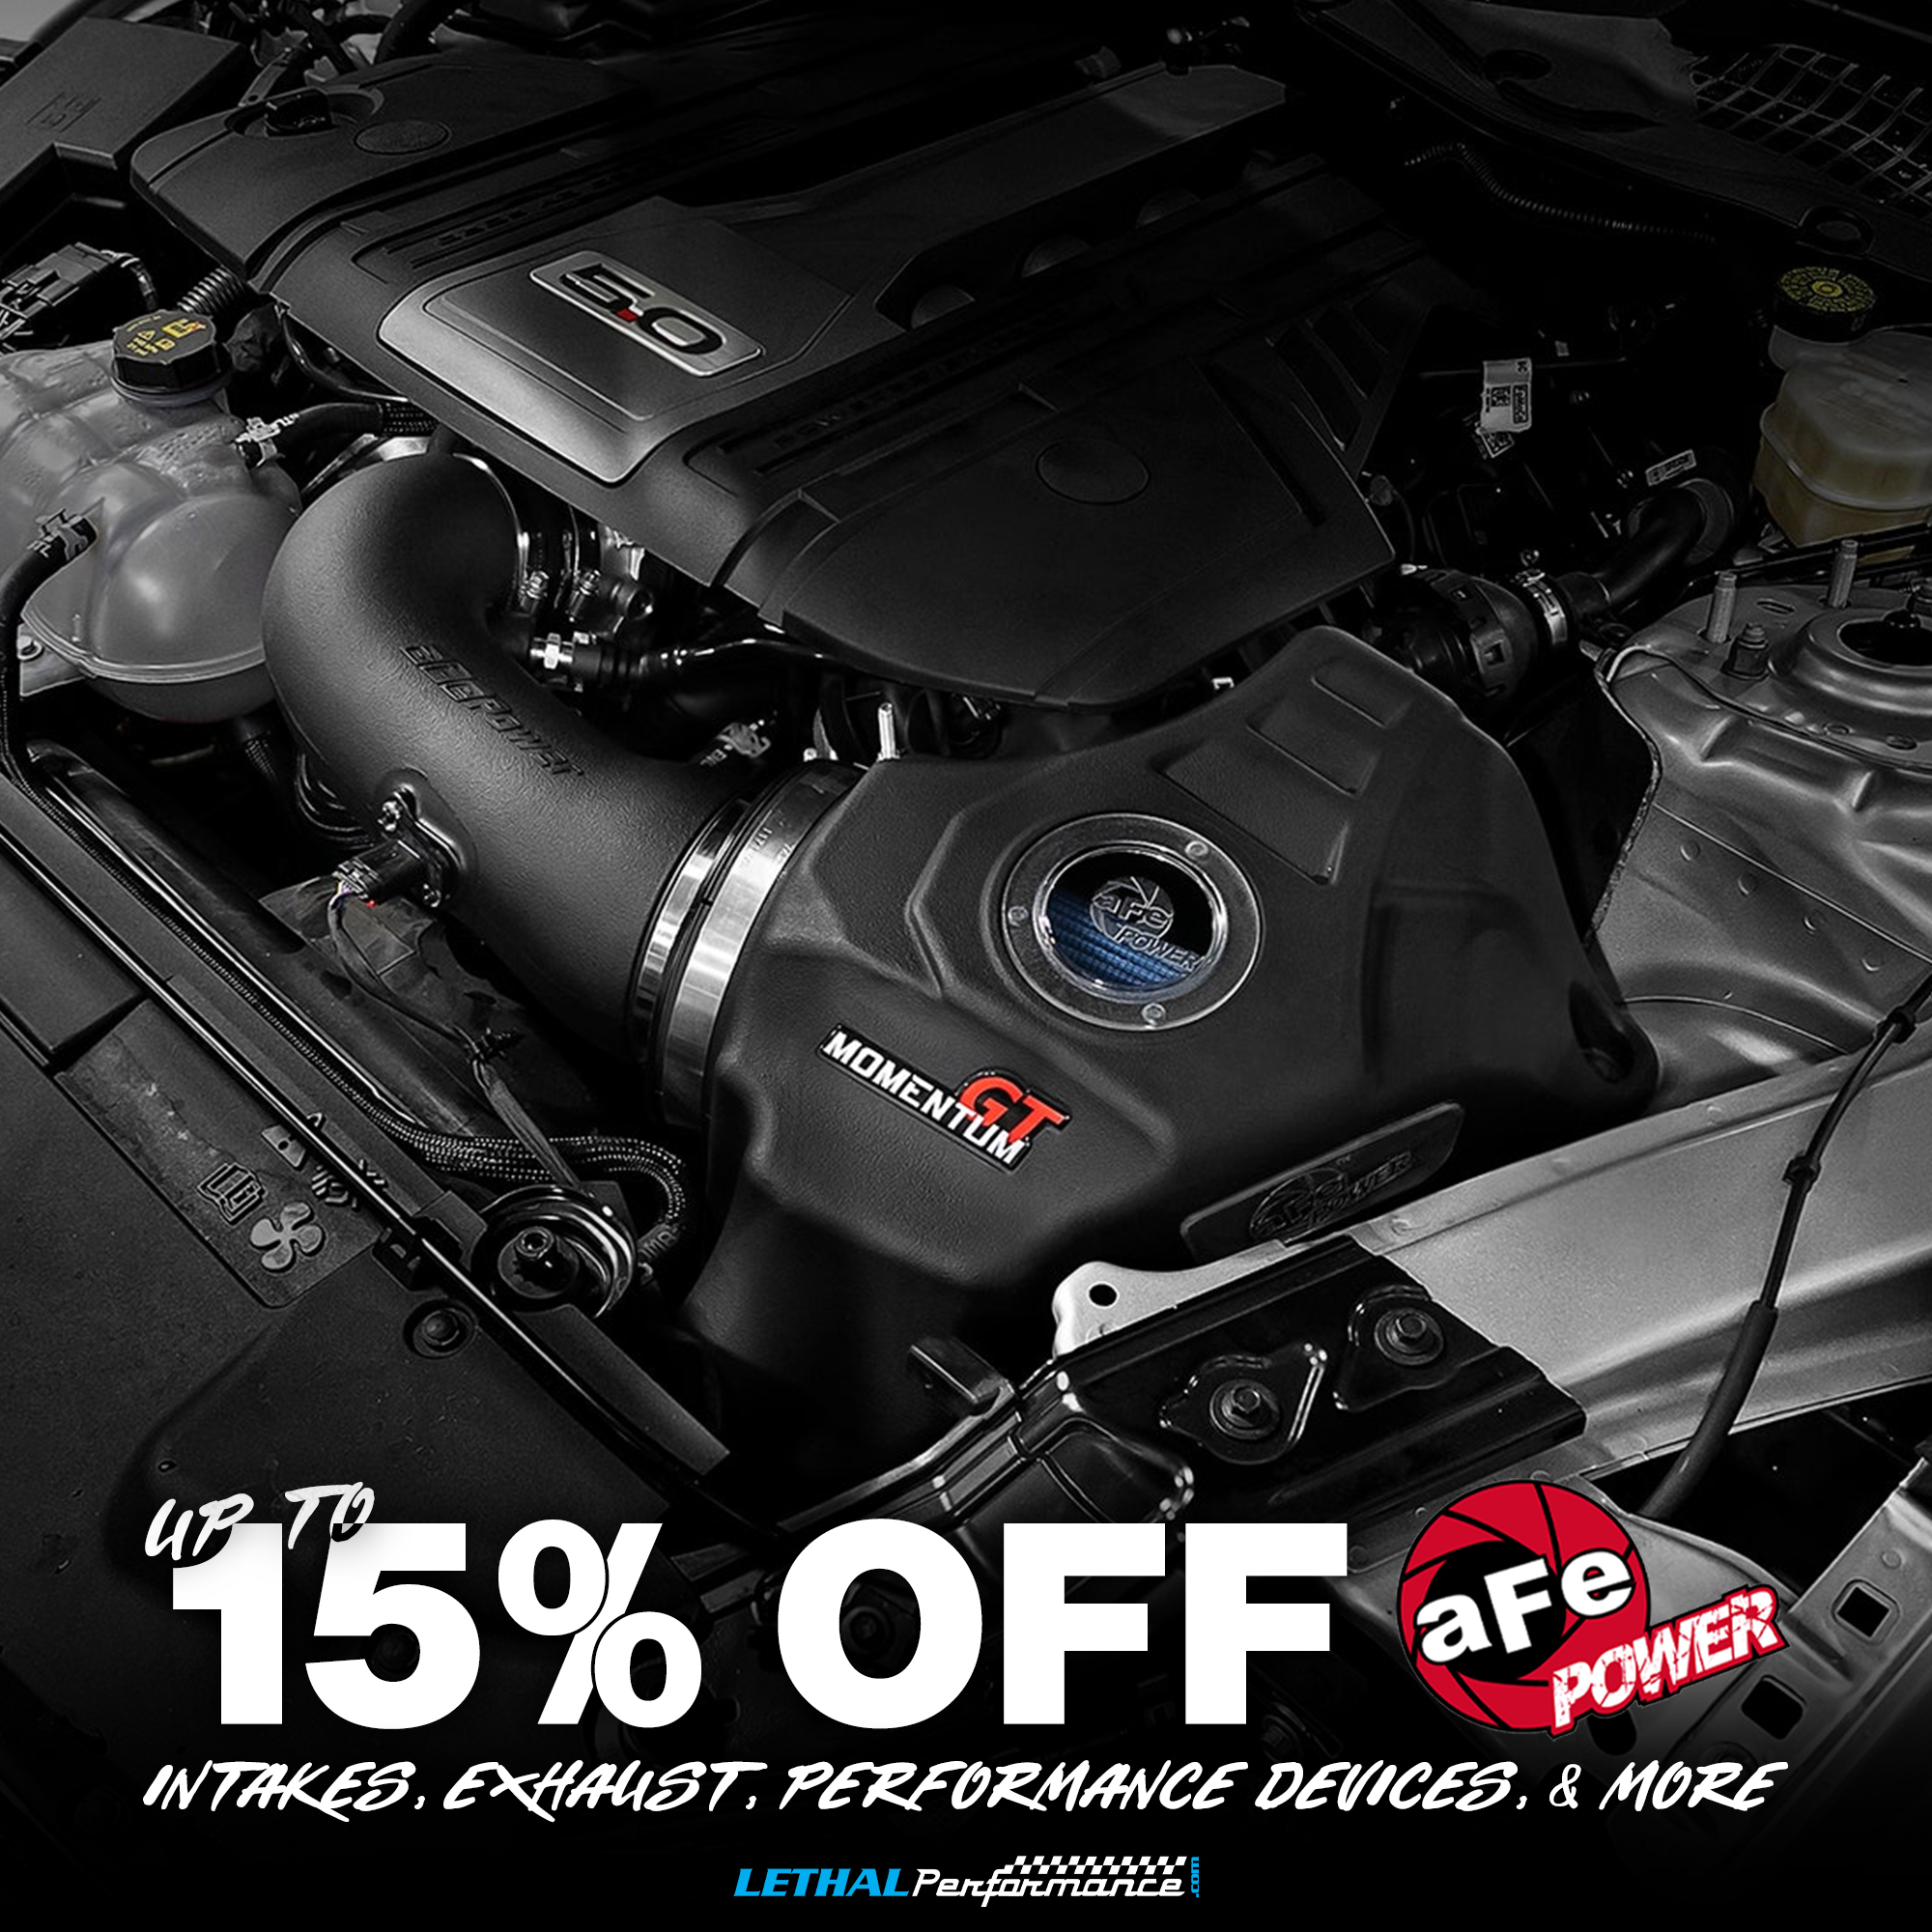 S650 Mustang AFe Power SALE here at Lethal Performance!! afe mustang 15% main